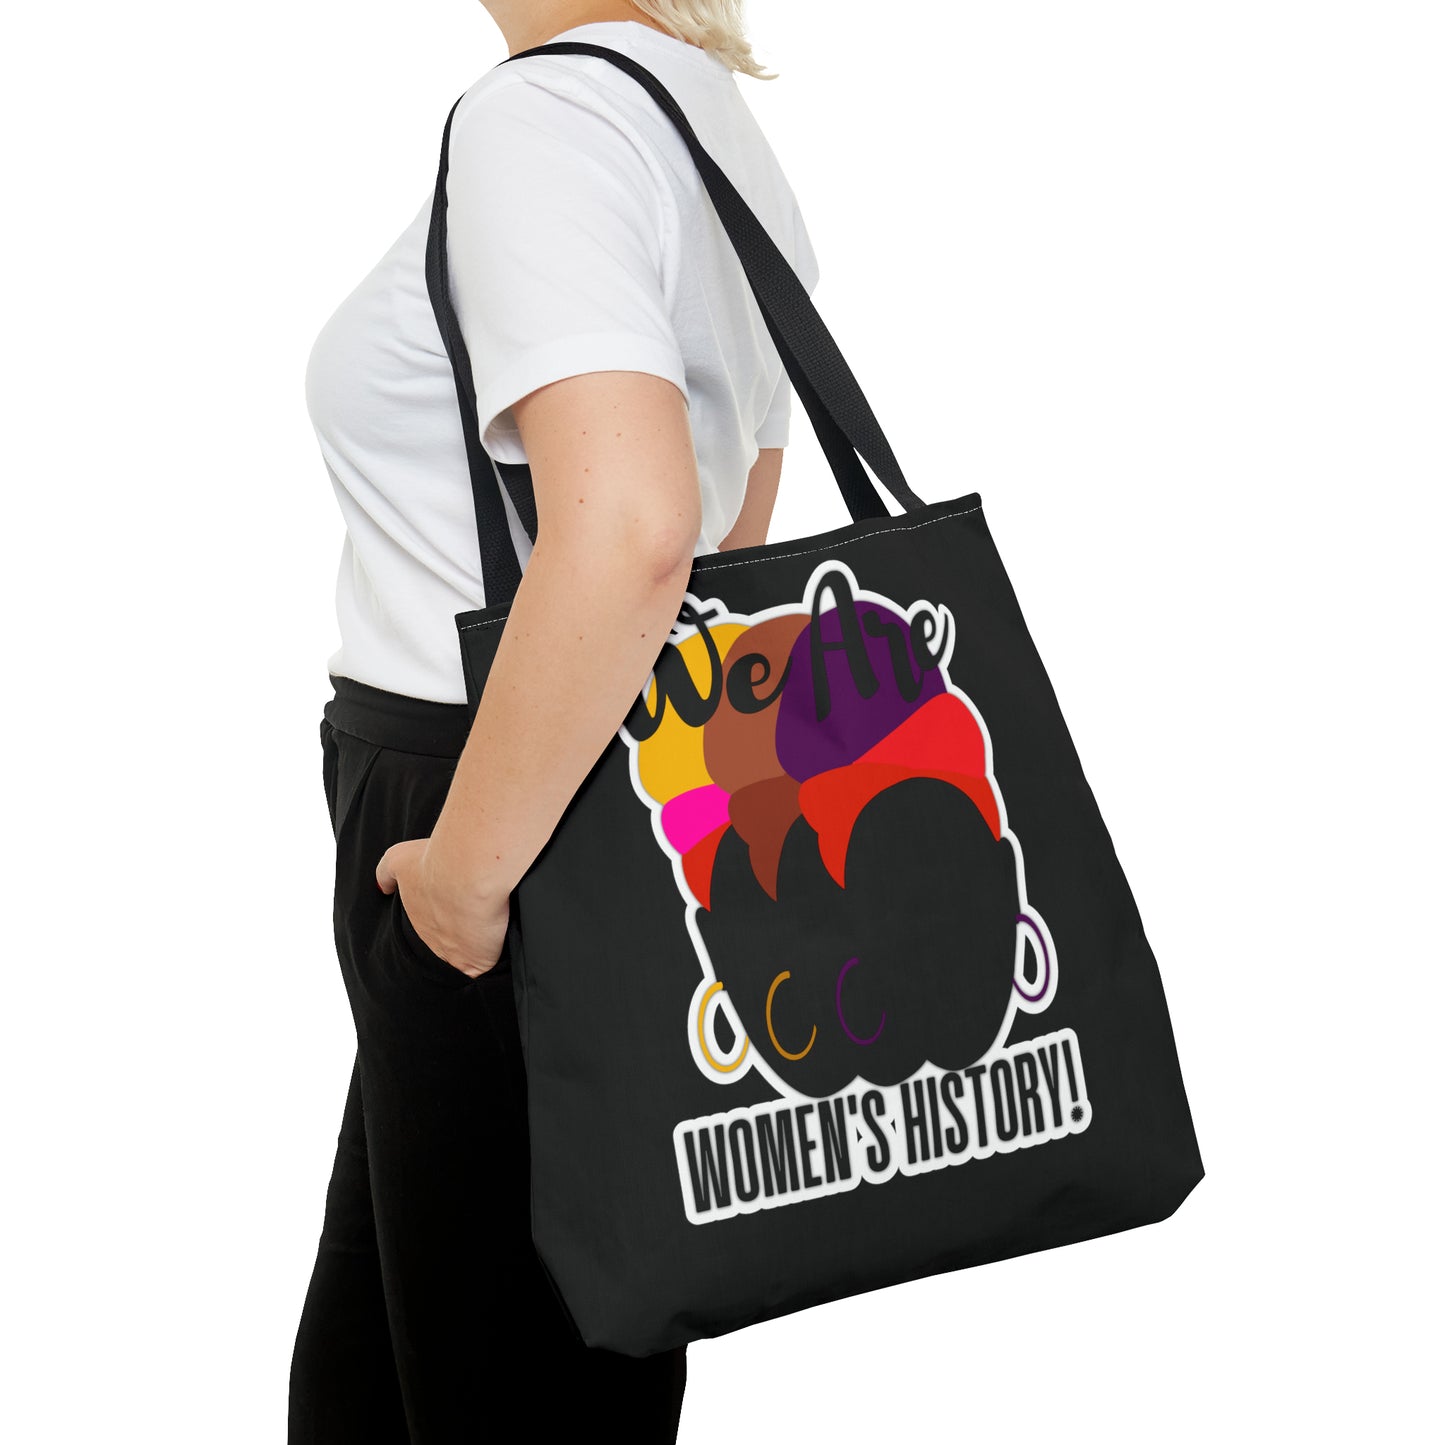 We Are Women History Tote Bag